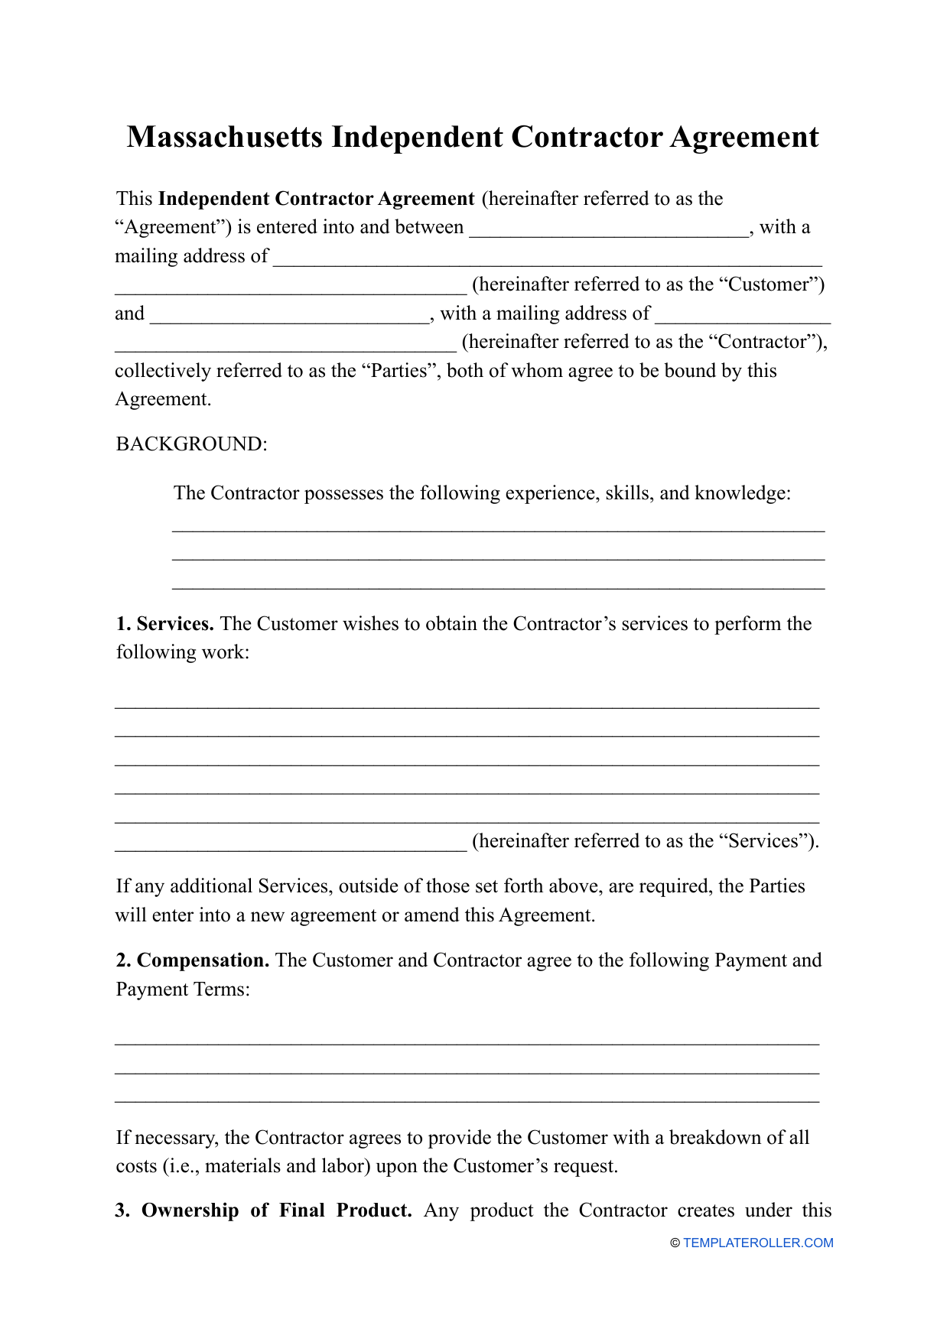 Independent Contractor Agreement Template - Massachusetts, Page 1